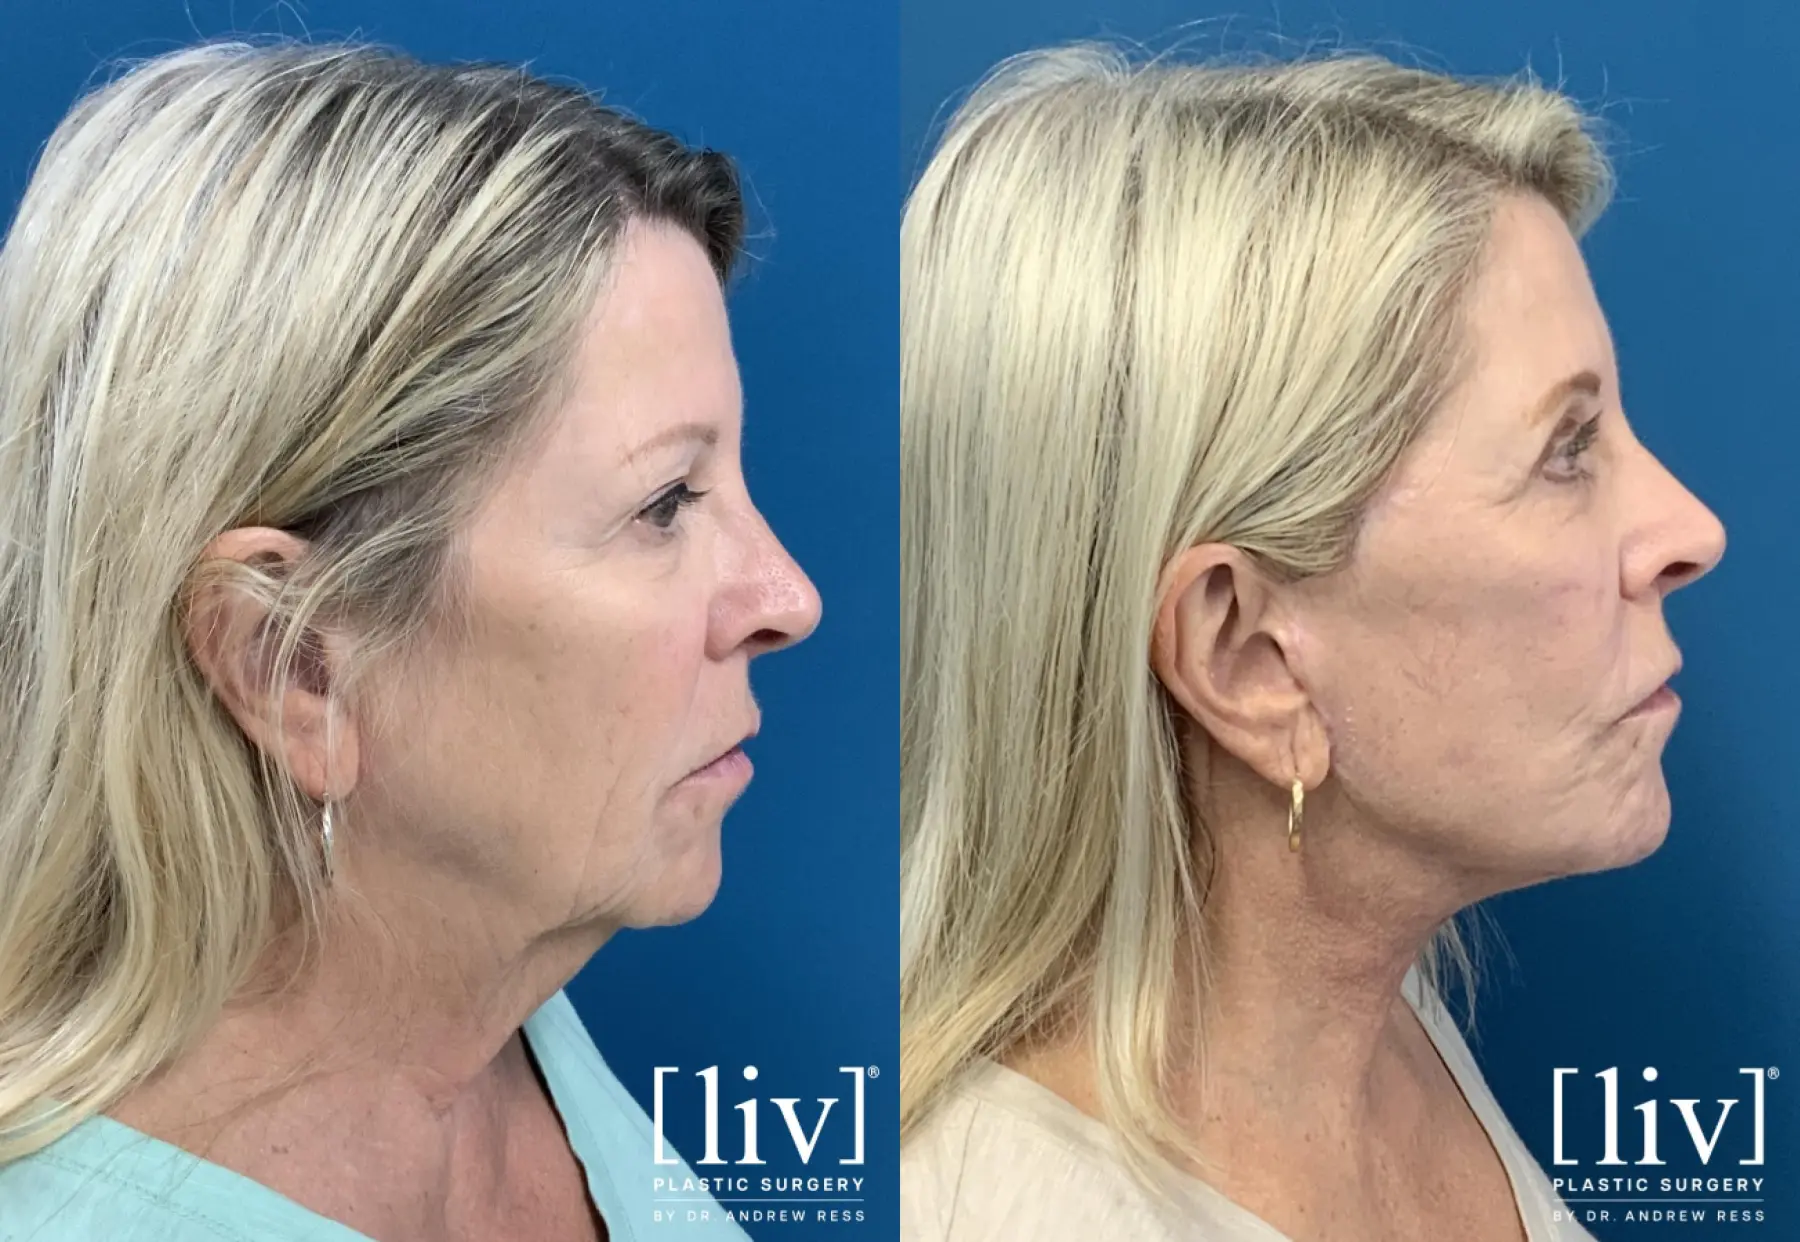 Face and Neck Lift, Co2 Laser, Fat Transfer, Upper Eyelid - Before and After 3